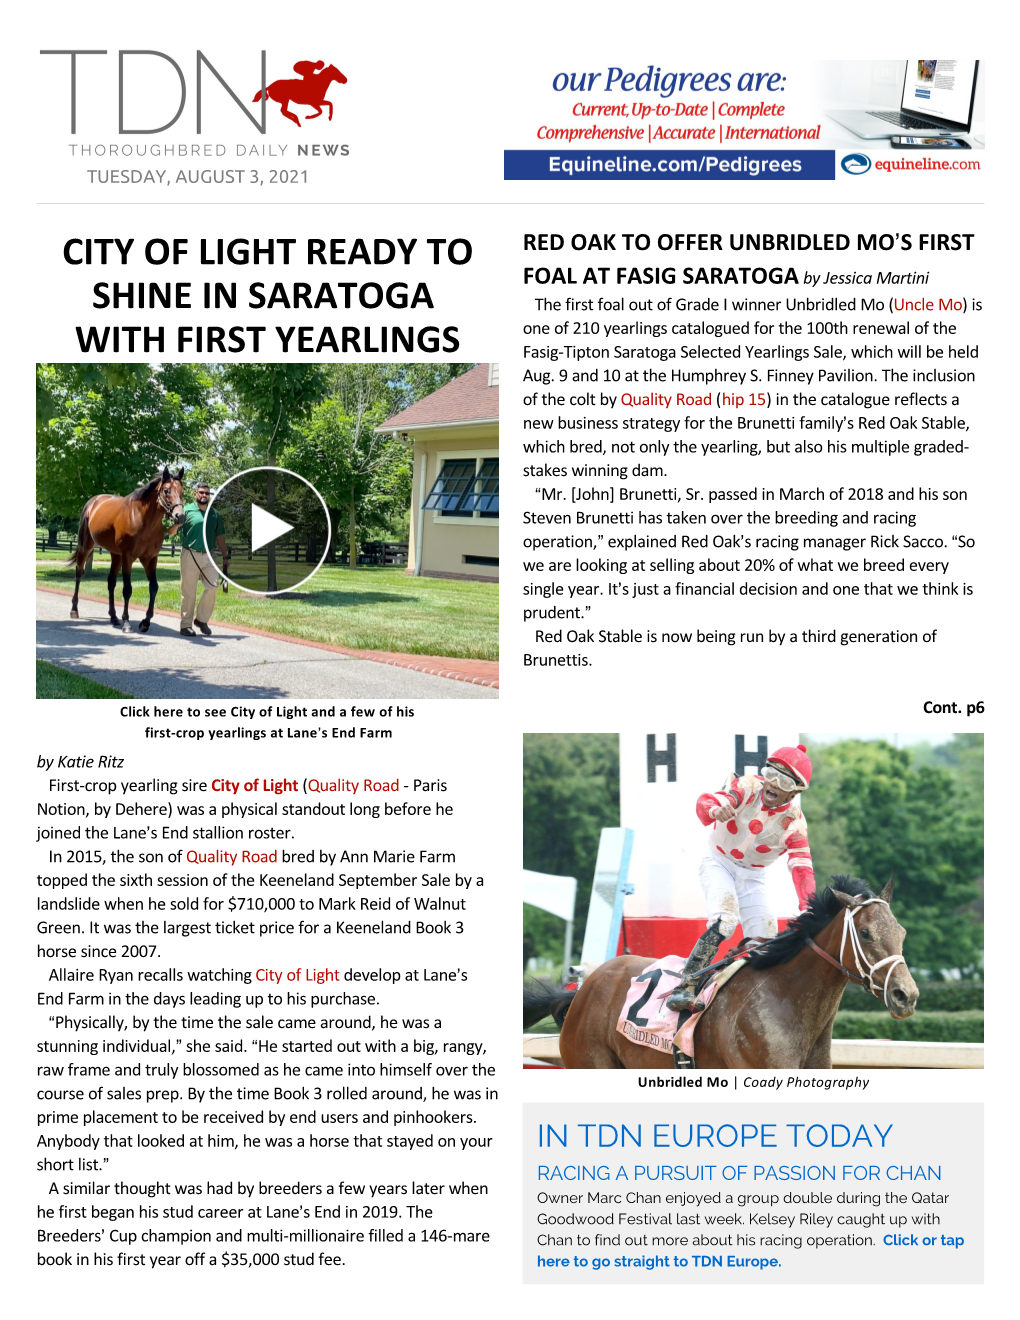 City of Light Ready to Shine in Saratoga with First